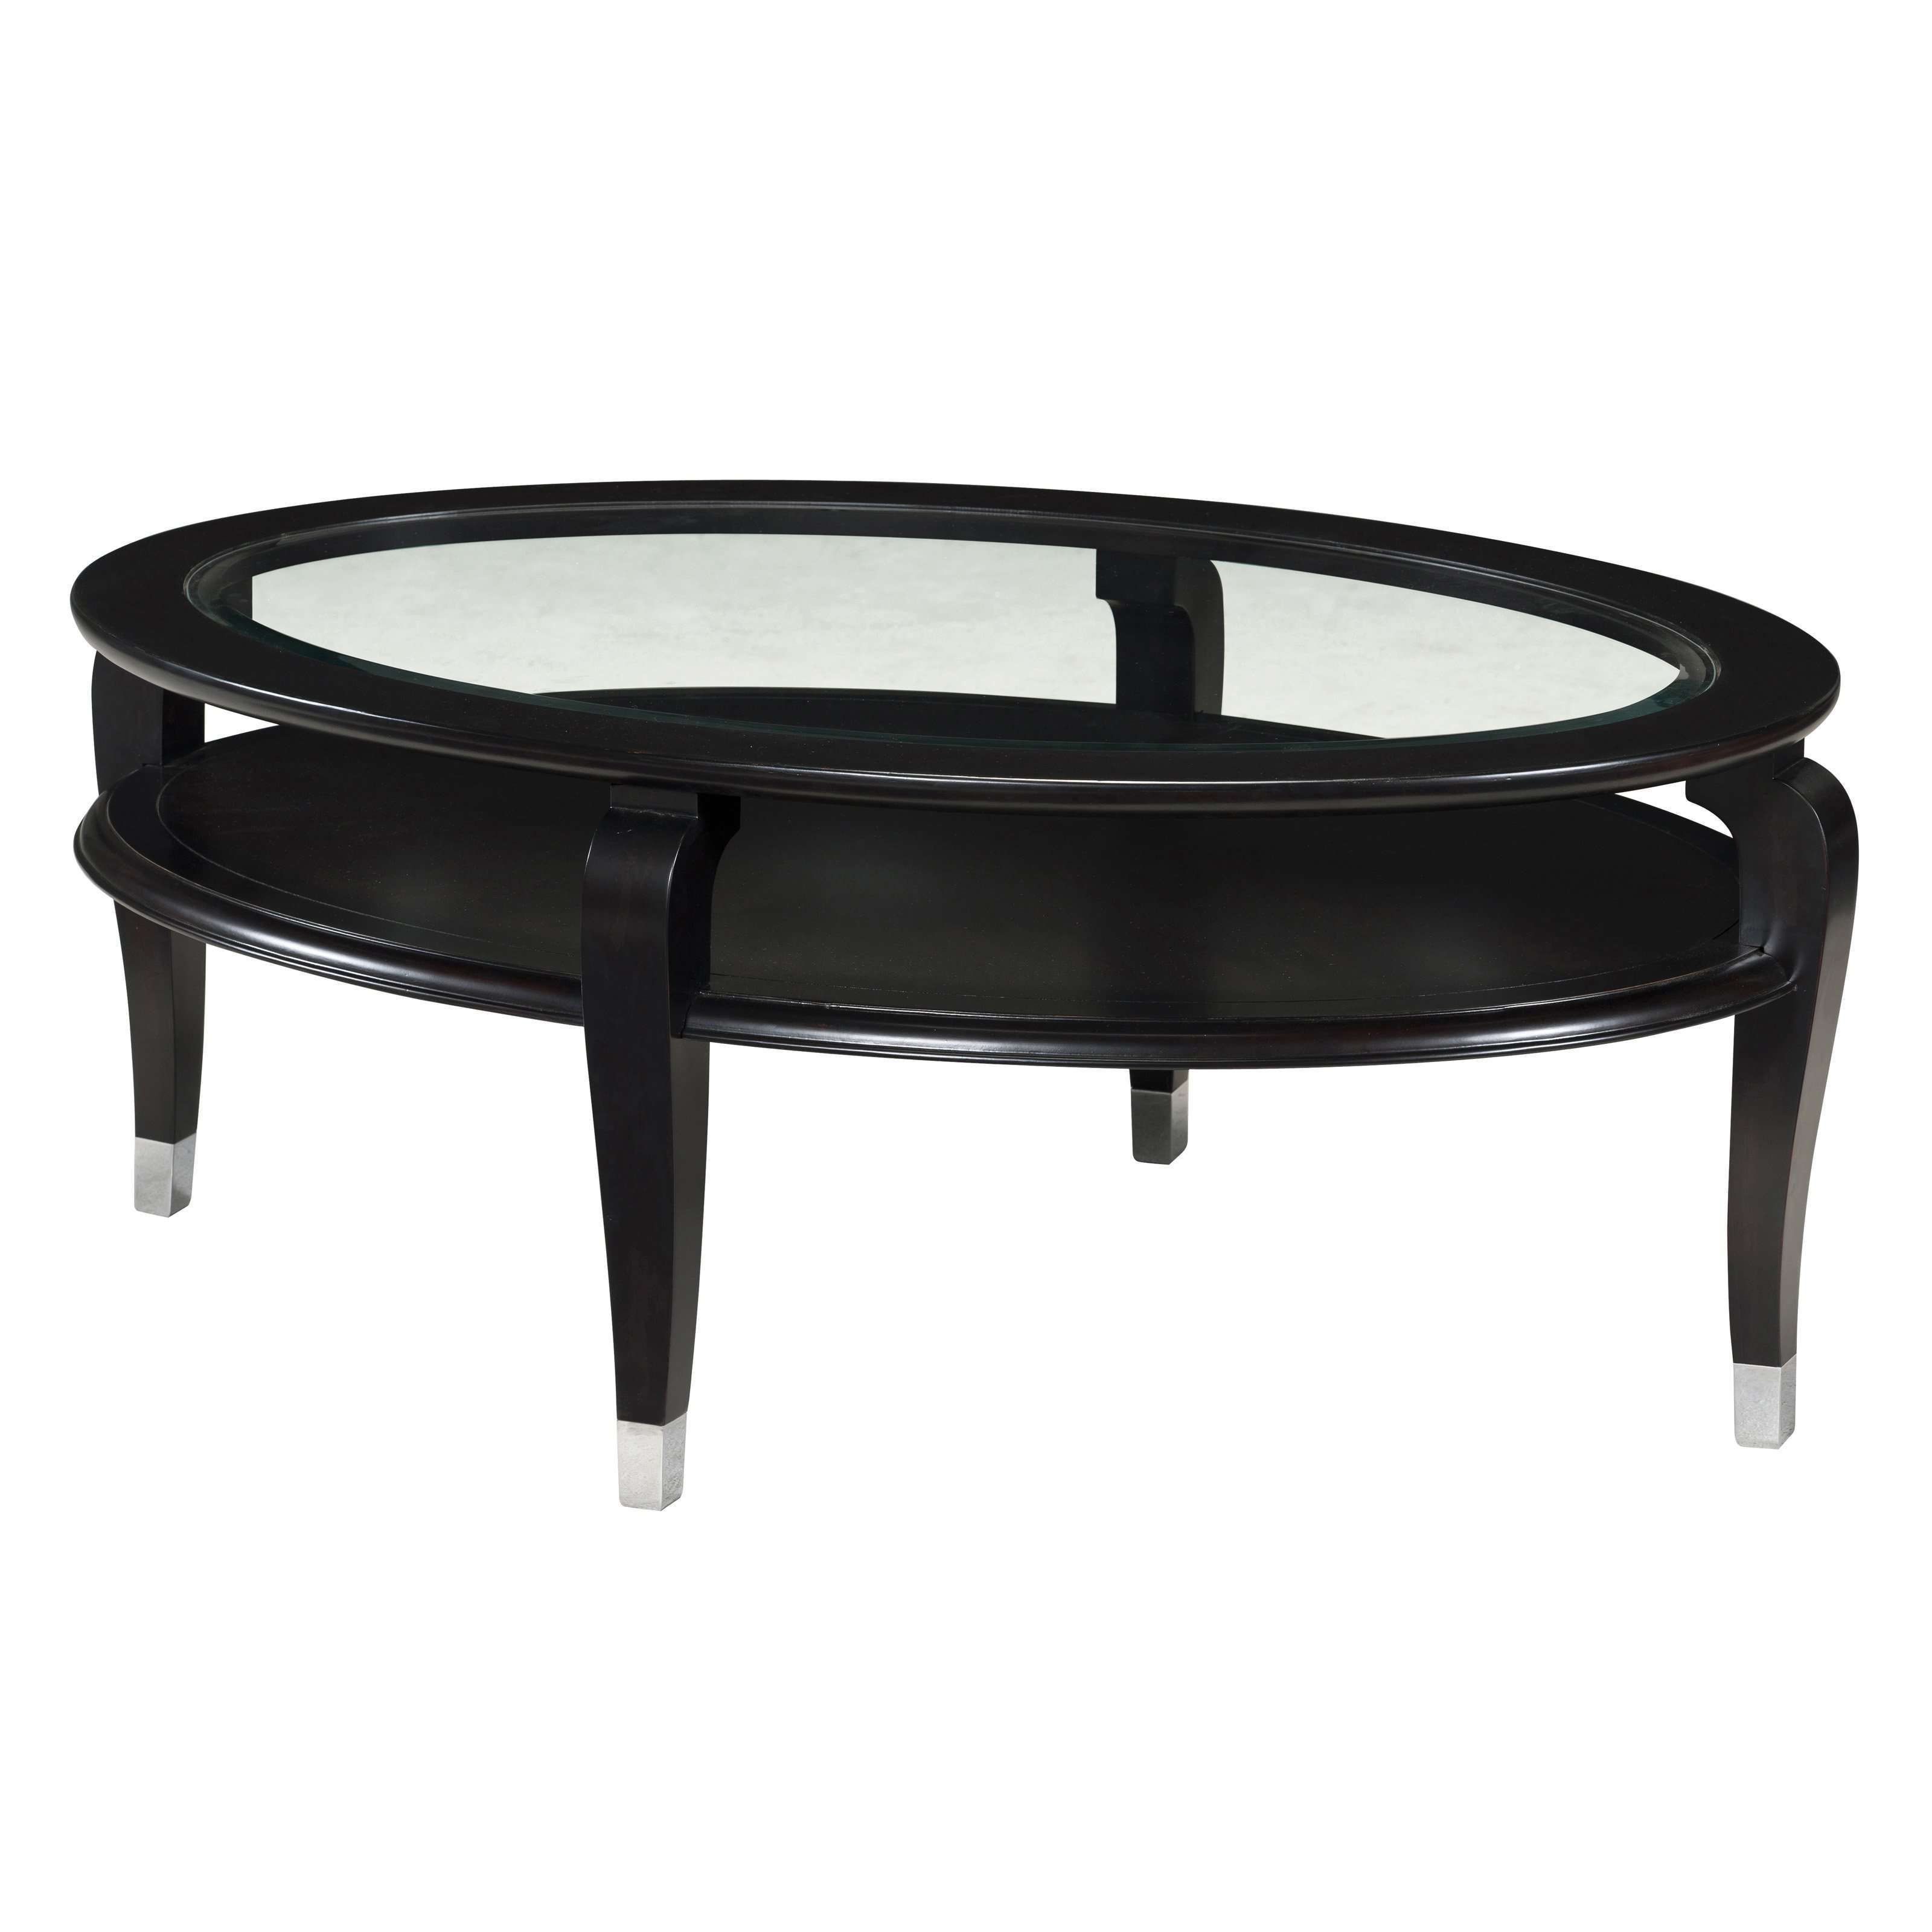 Coffee Table : Awesome Small Oval Coffee Table Small Round Coffee Regarding Current Oval Black Glass Coffee Tables (View 2 of 20)